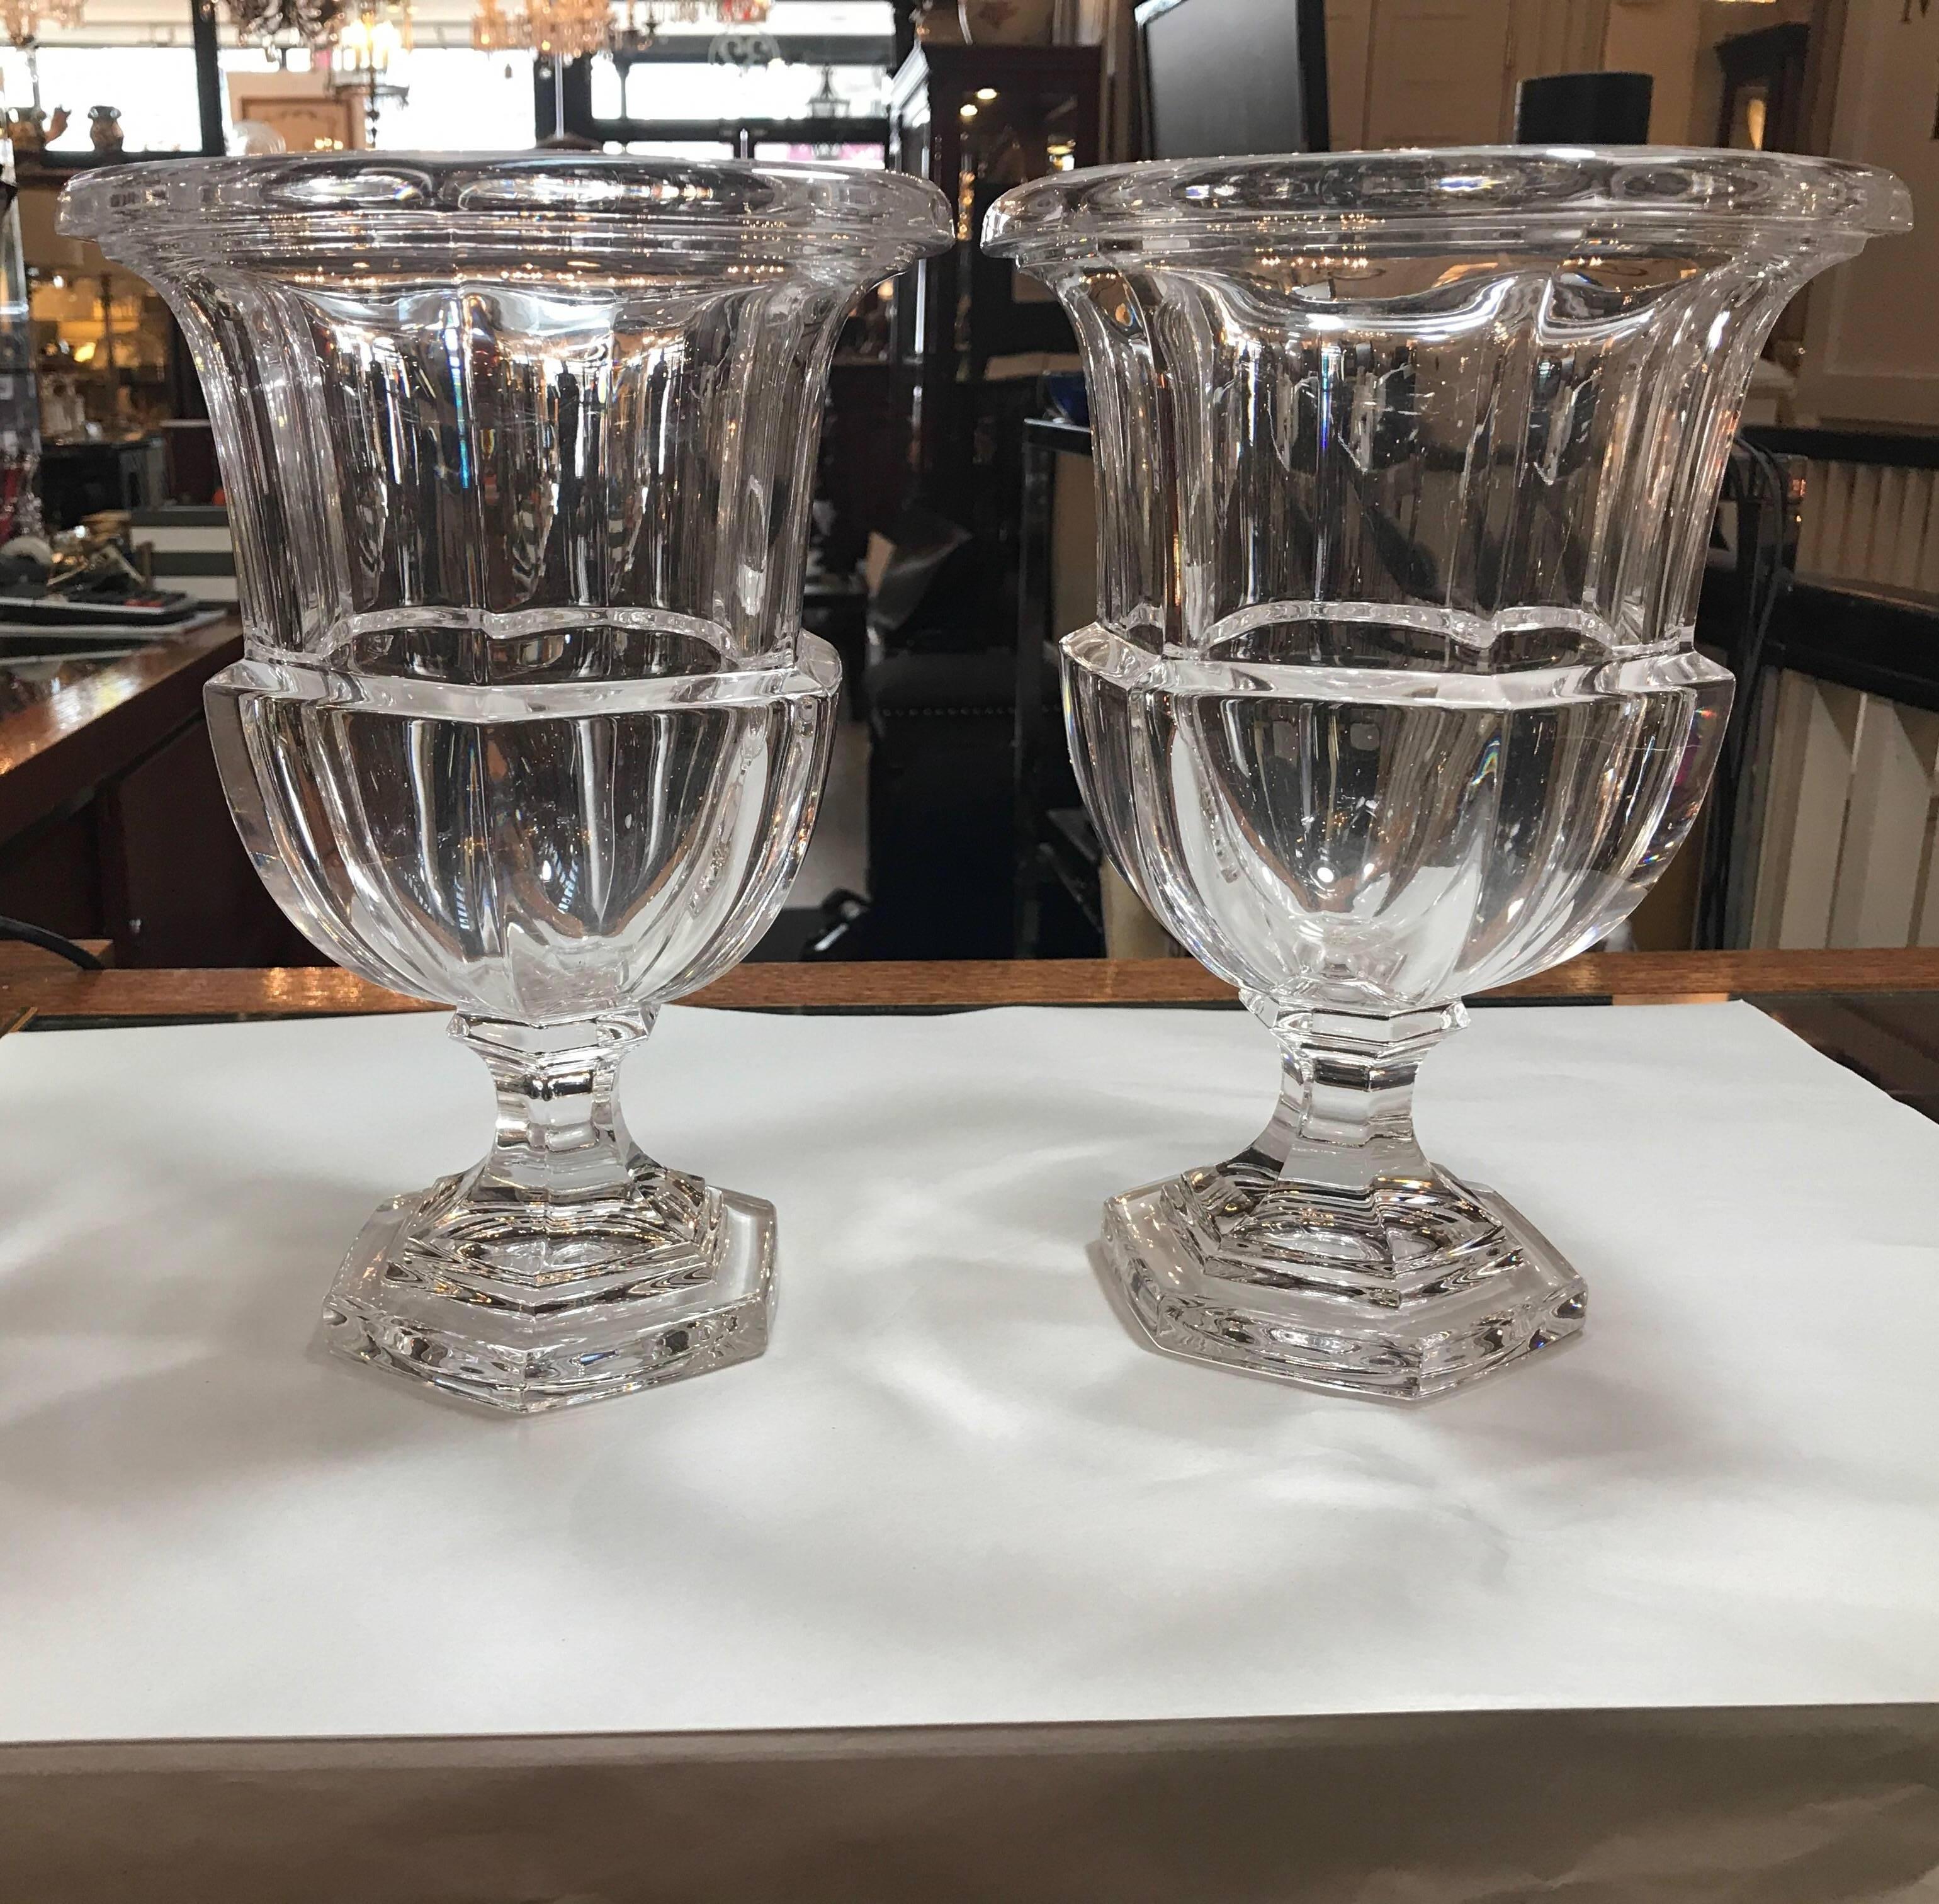 An elegant pair of high quality water clear crystal urns. The panel cut sides with rolled edge tops, urn body resting pedestal base. We have two pairs available.